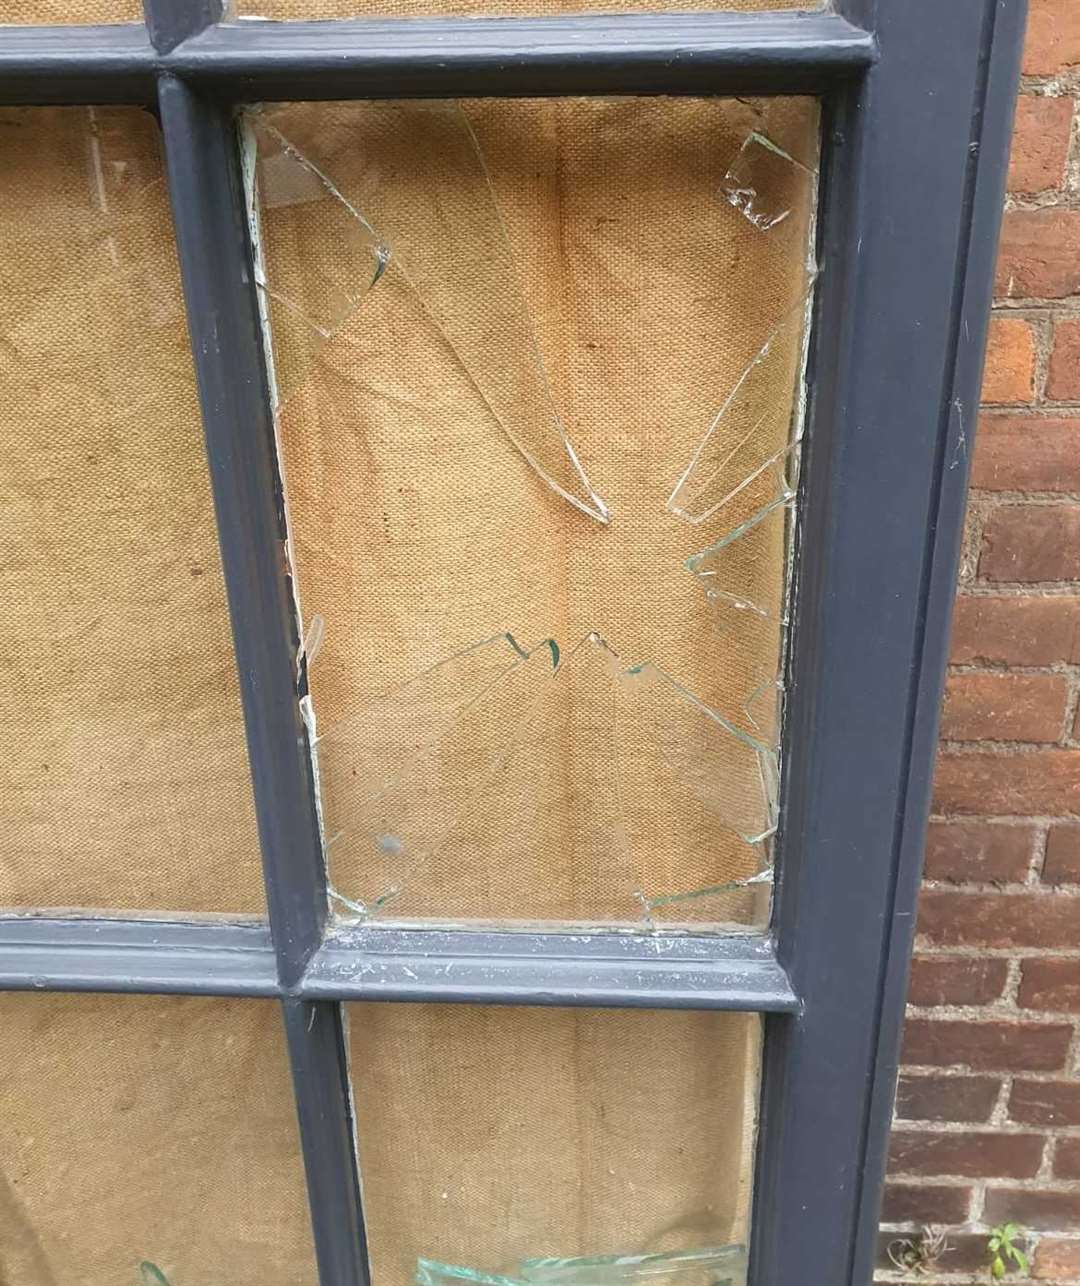 Vandals smashed a window at The Rising Star in Tenterden. Picture: Tara Louise McCarraher